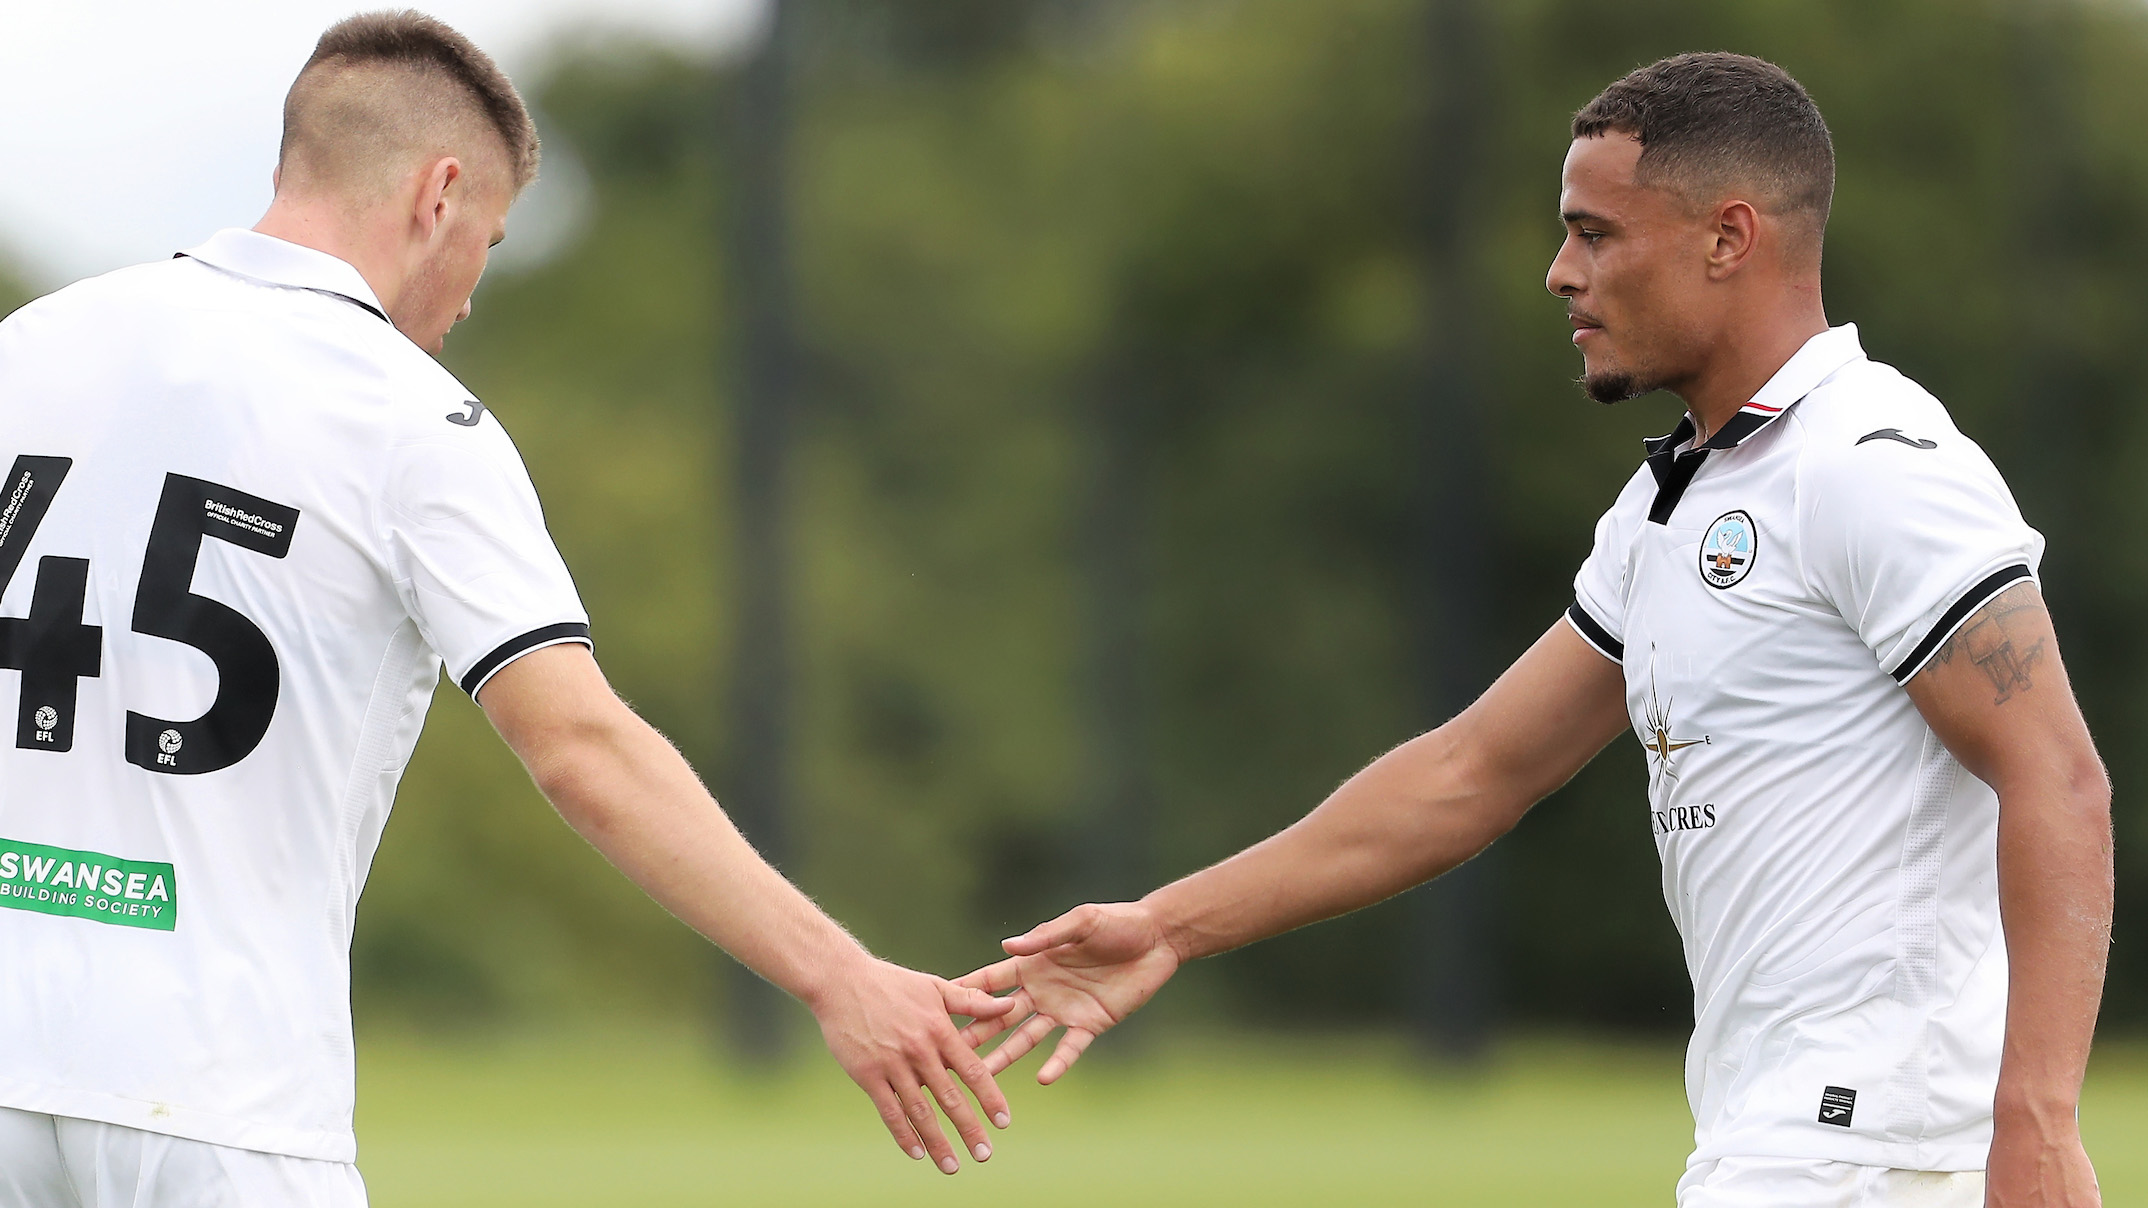 Joel Latibeaudiere high-fives Cameron Congreve after goal against Colchester United in pre-season friendly